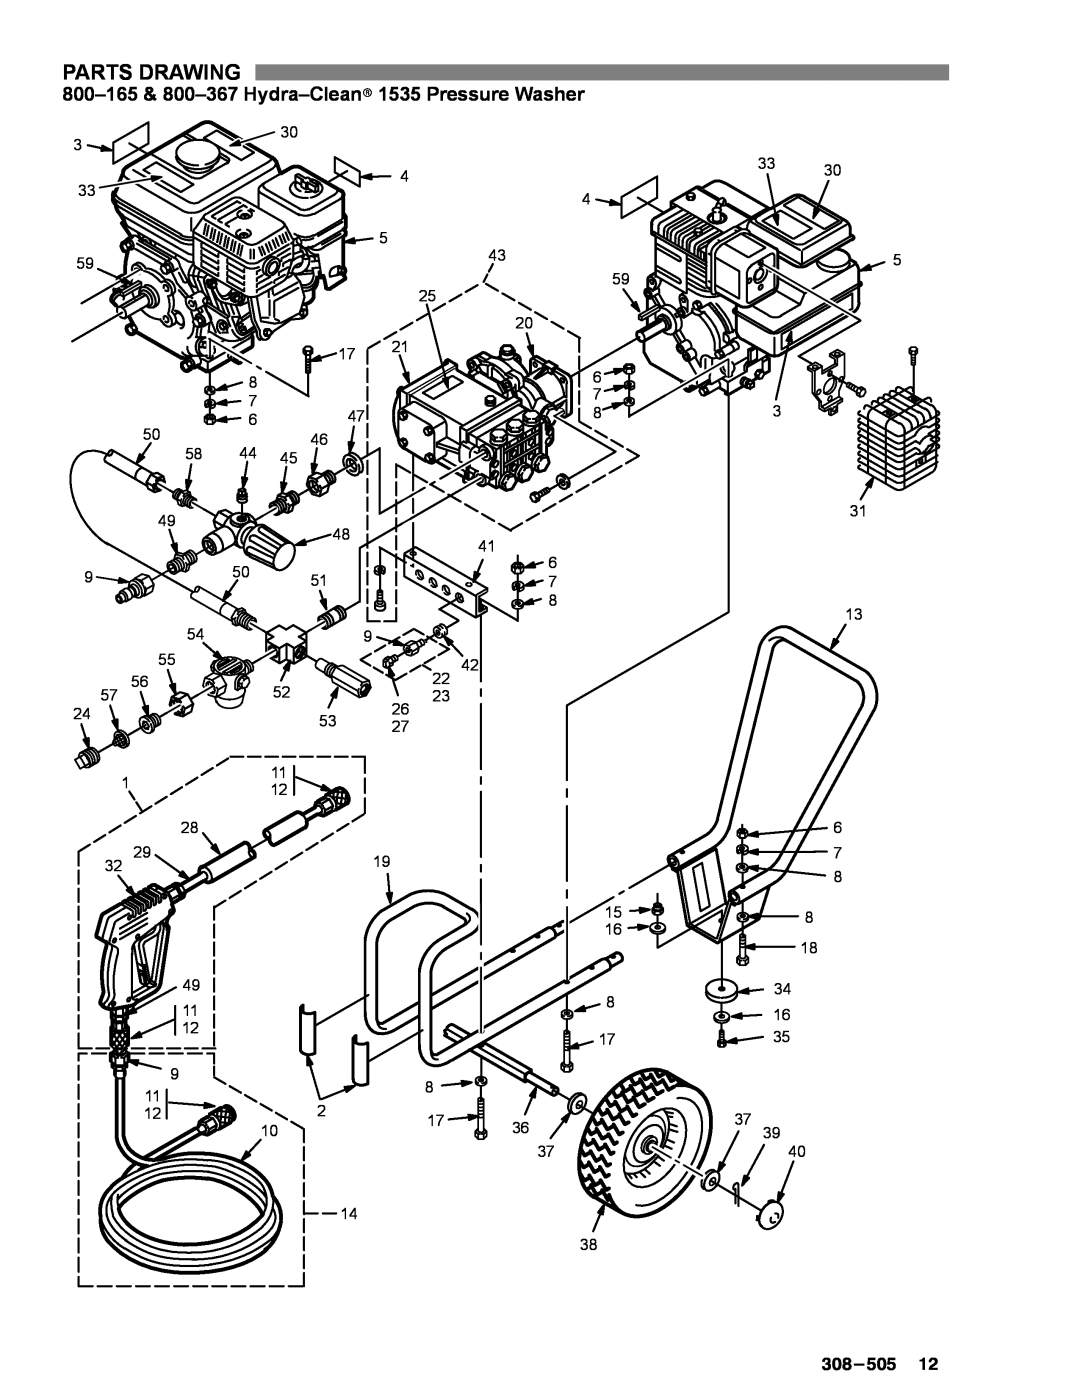 Graco Inc 2040, 800-164, 800-290, 308-505 manual 800-165 & 800-367 Hydra-Cleanr 1535 Pressure Washer, Parts Drawing, 3855 